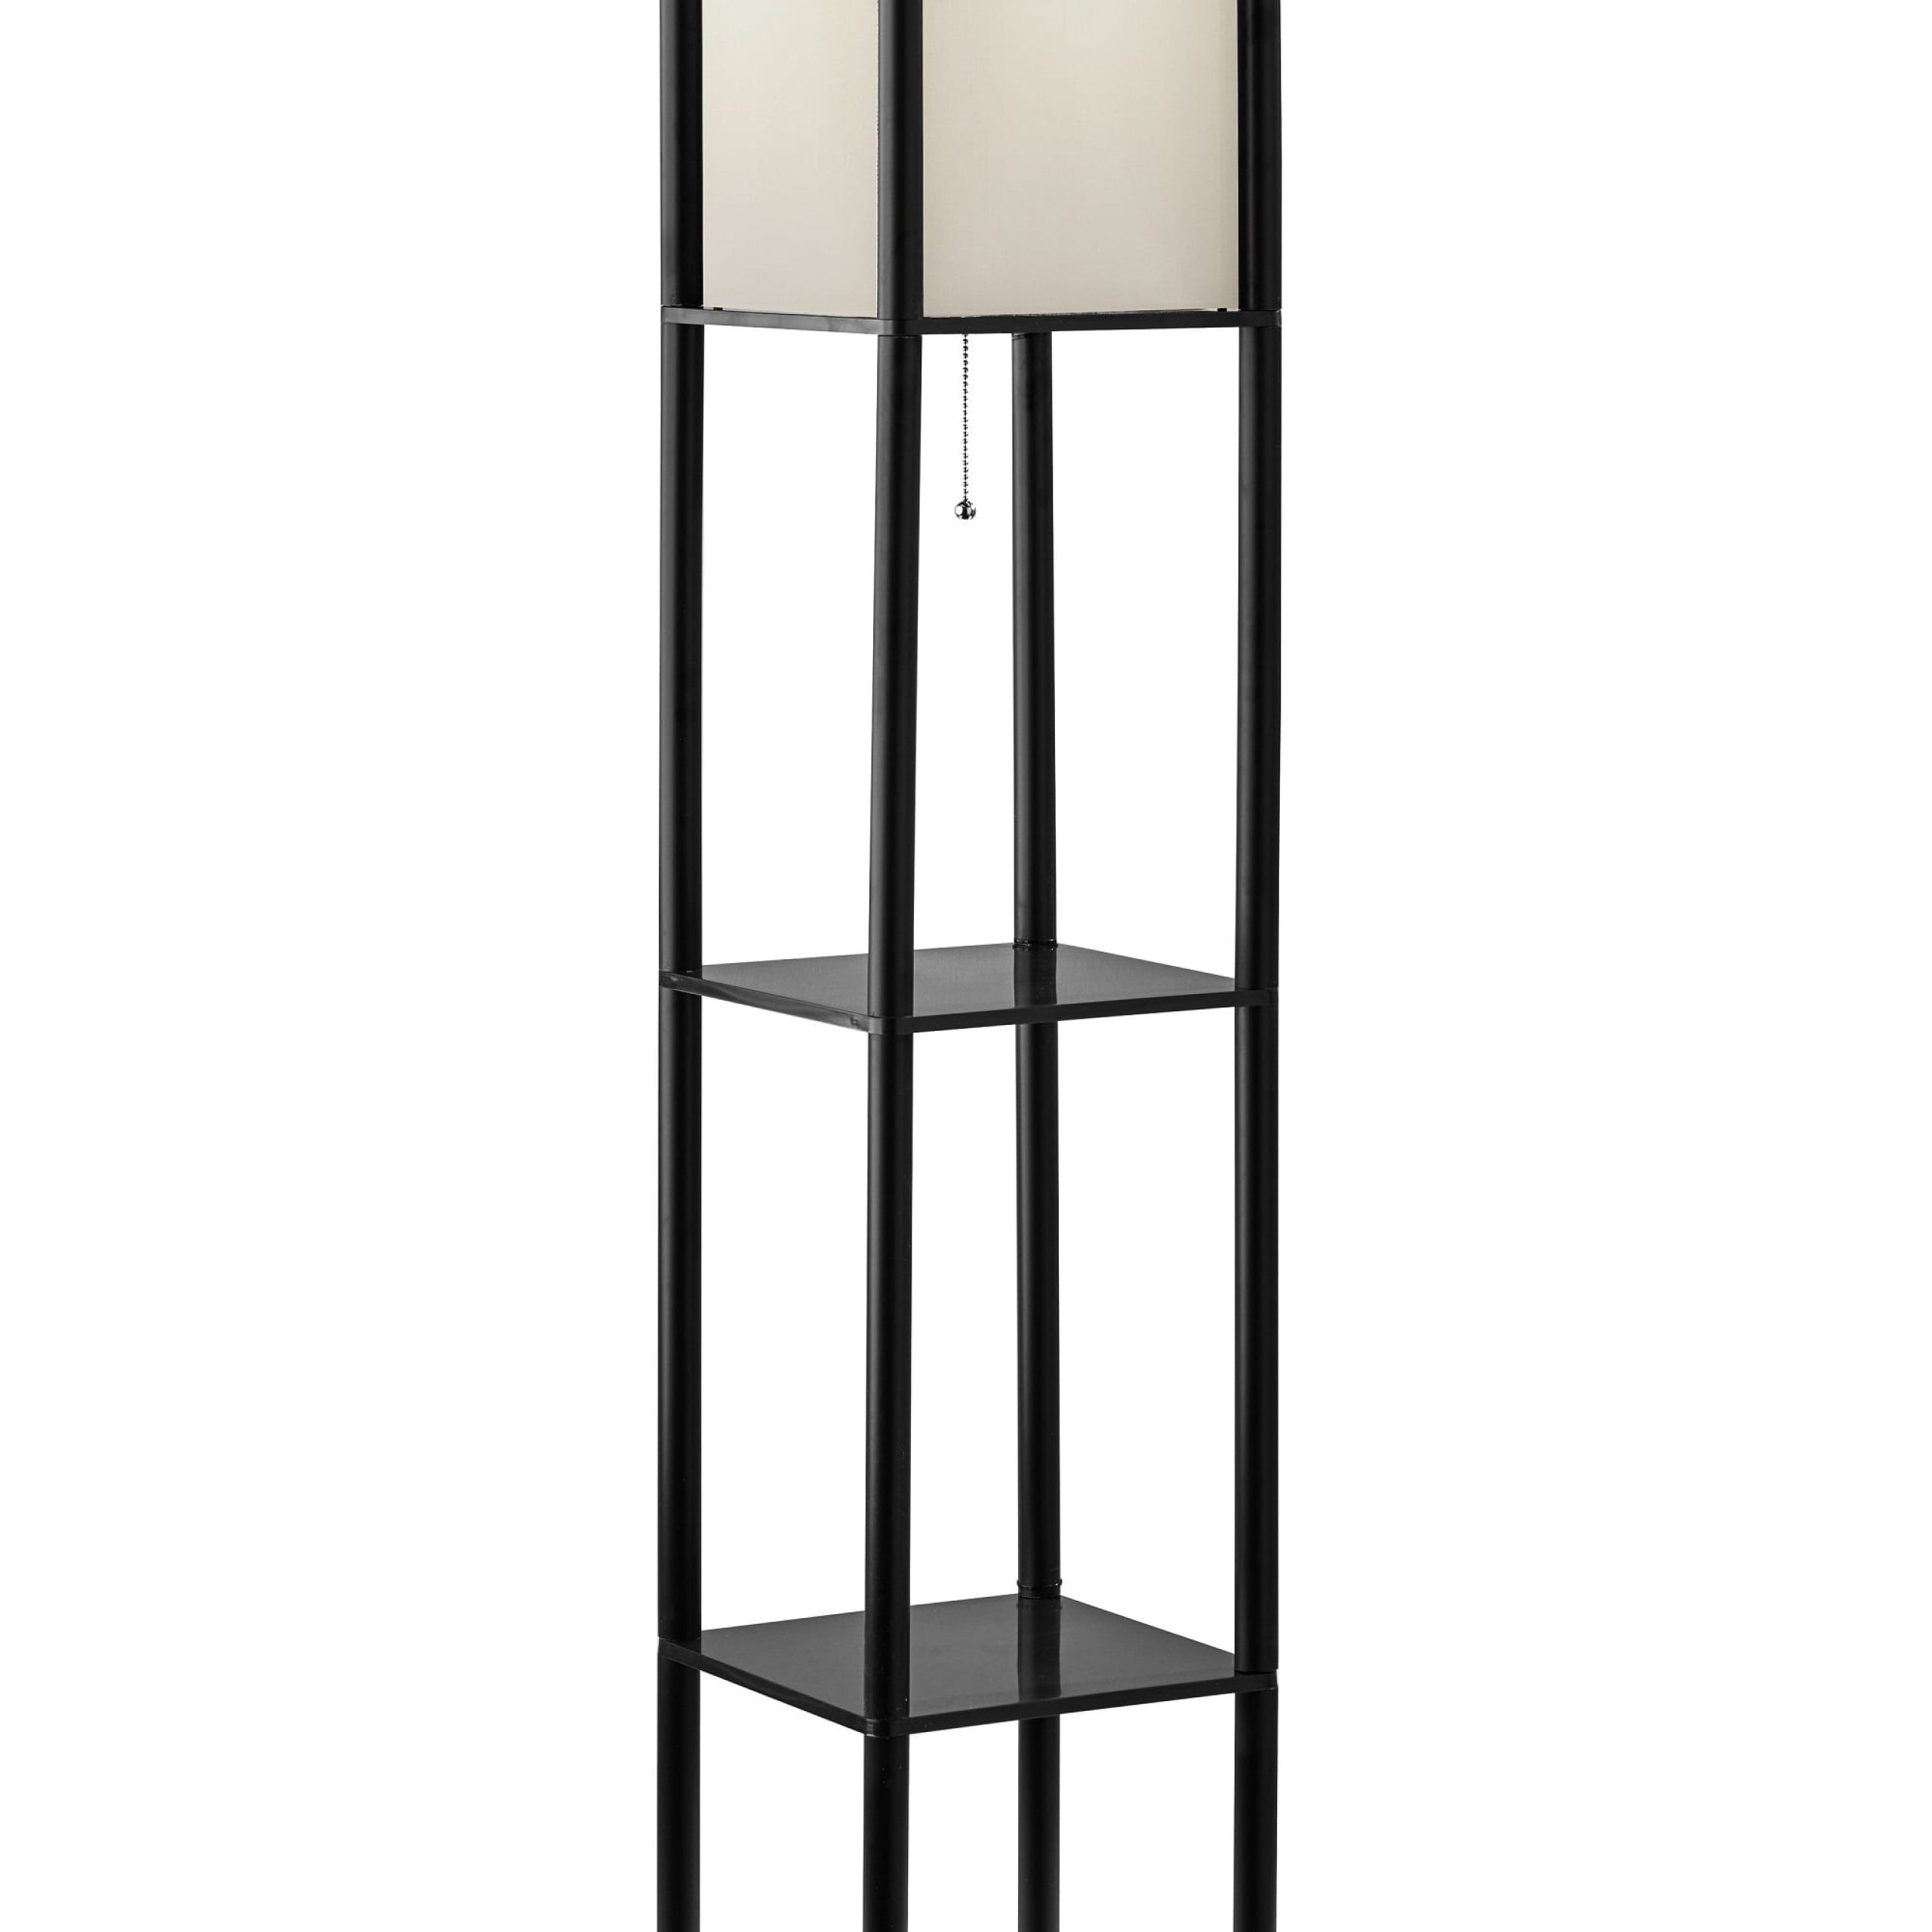 Mainstays 62 Inch Tall Shelf Floor Lamp, Black With White Fabric Shade –  Walmart For 62 Inch Floor Lamps (View 3 of 15)